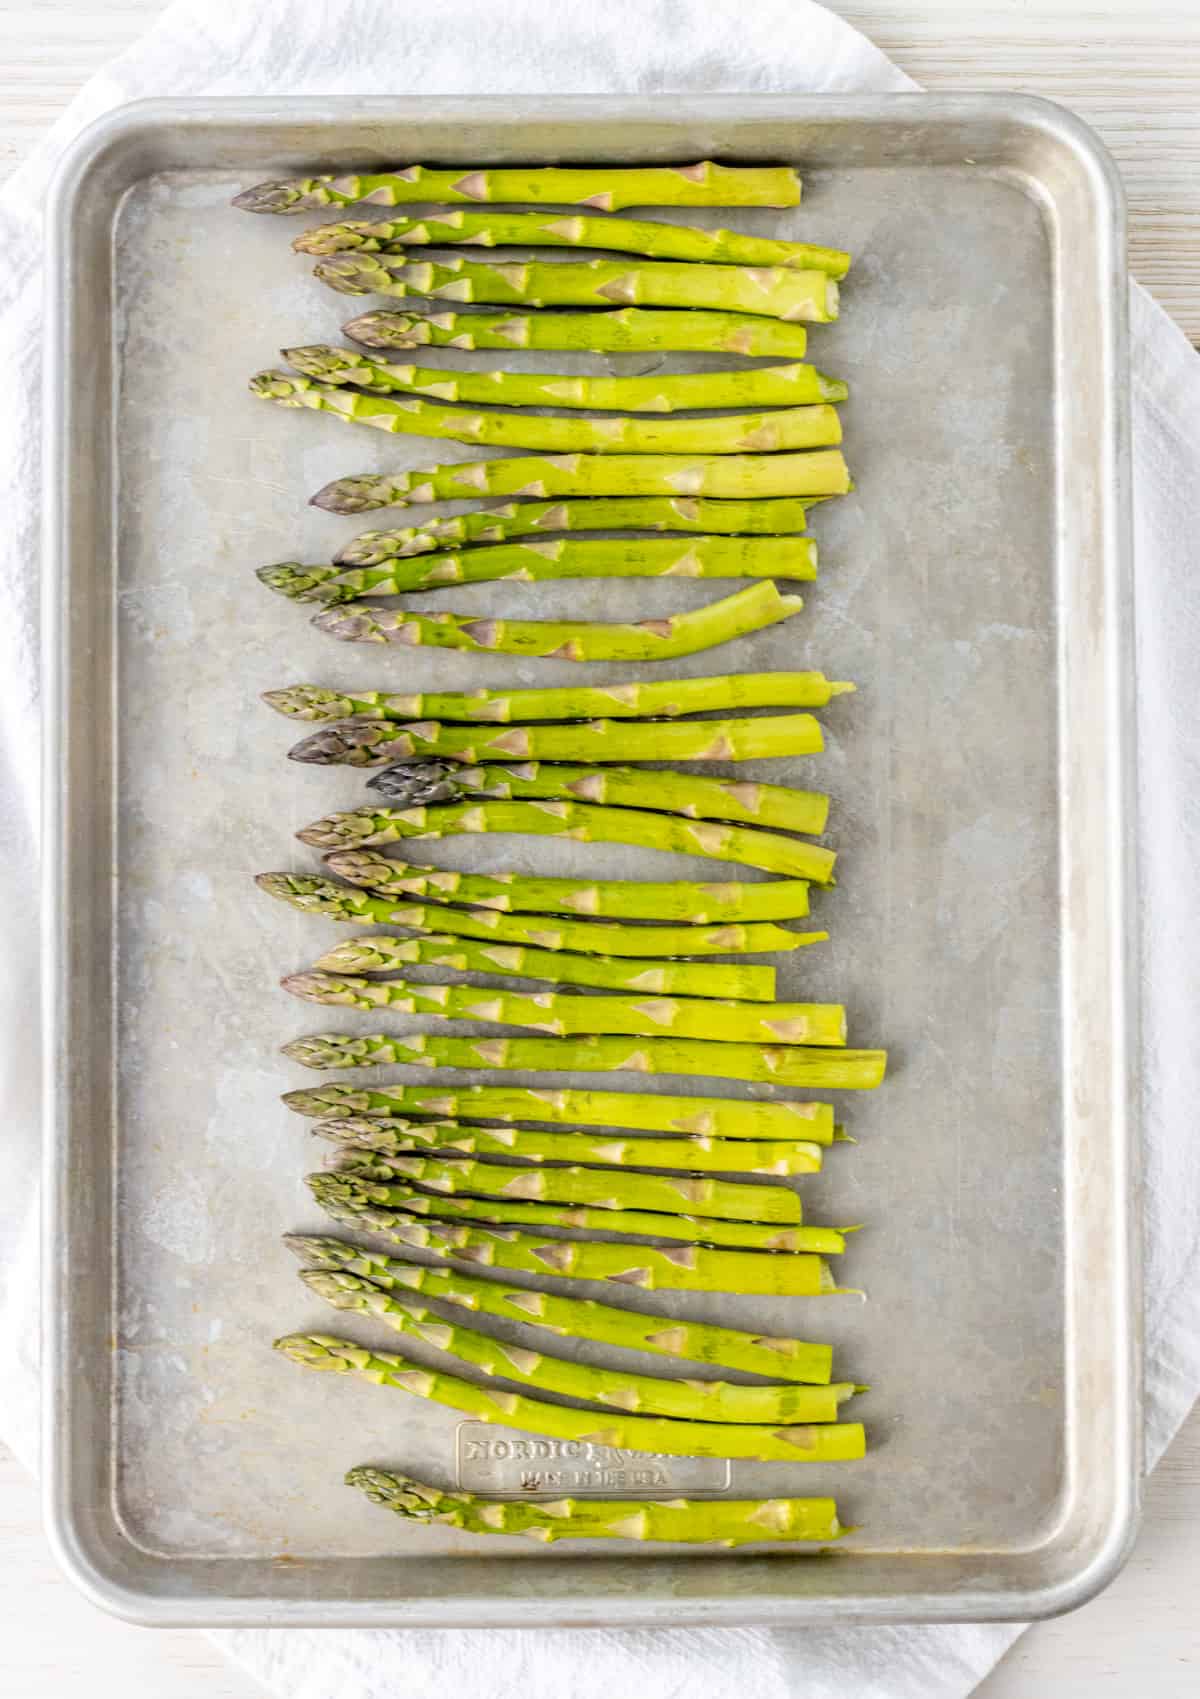 Asparagus on a baking sheet drizzled with olive oil.